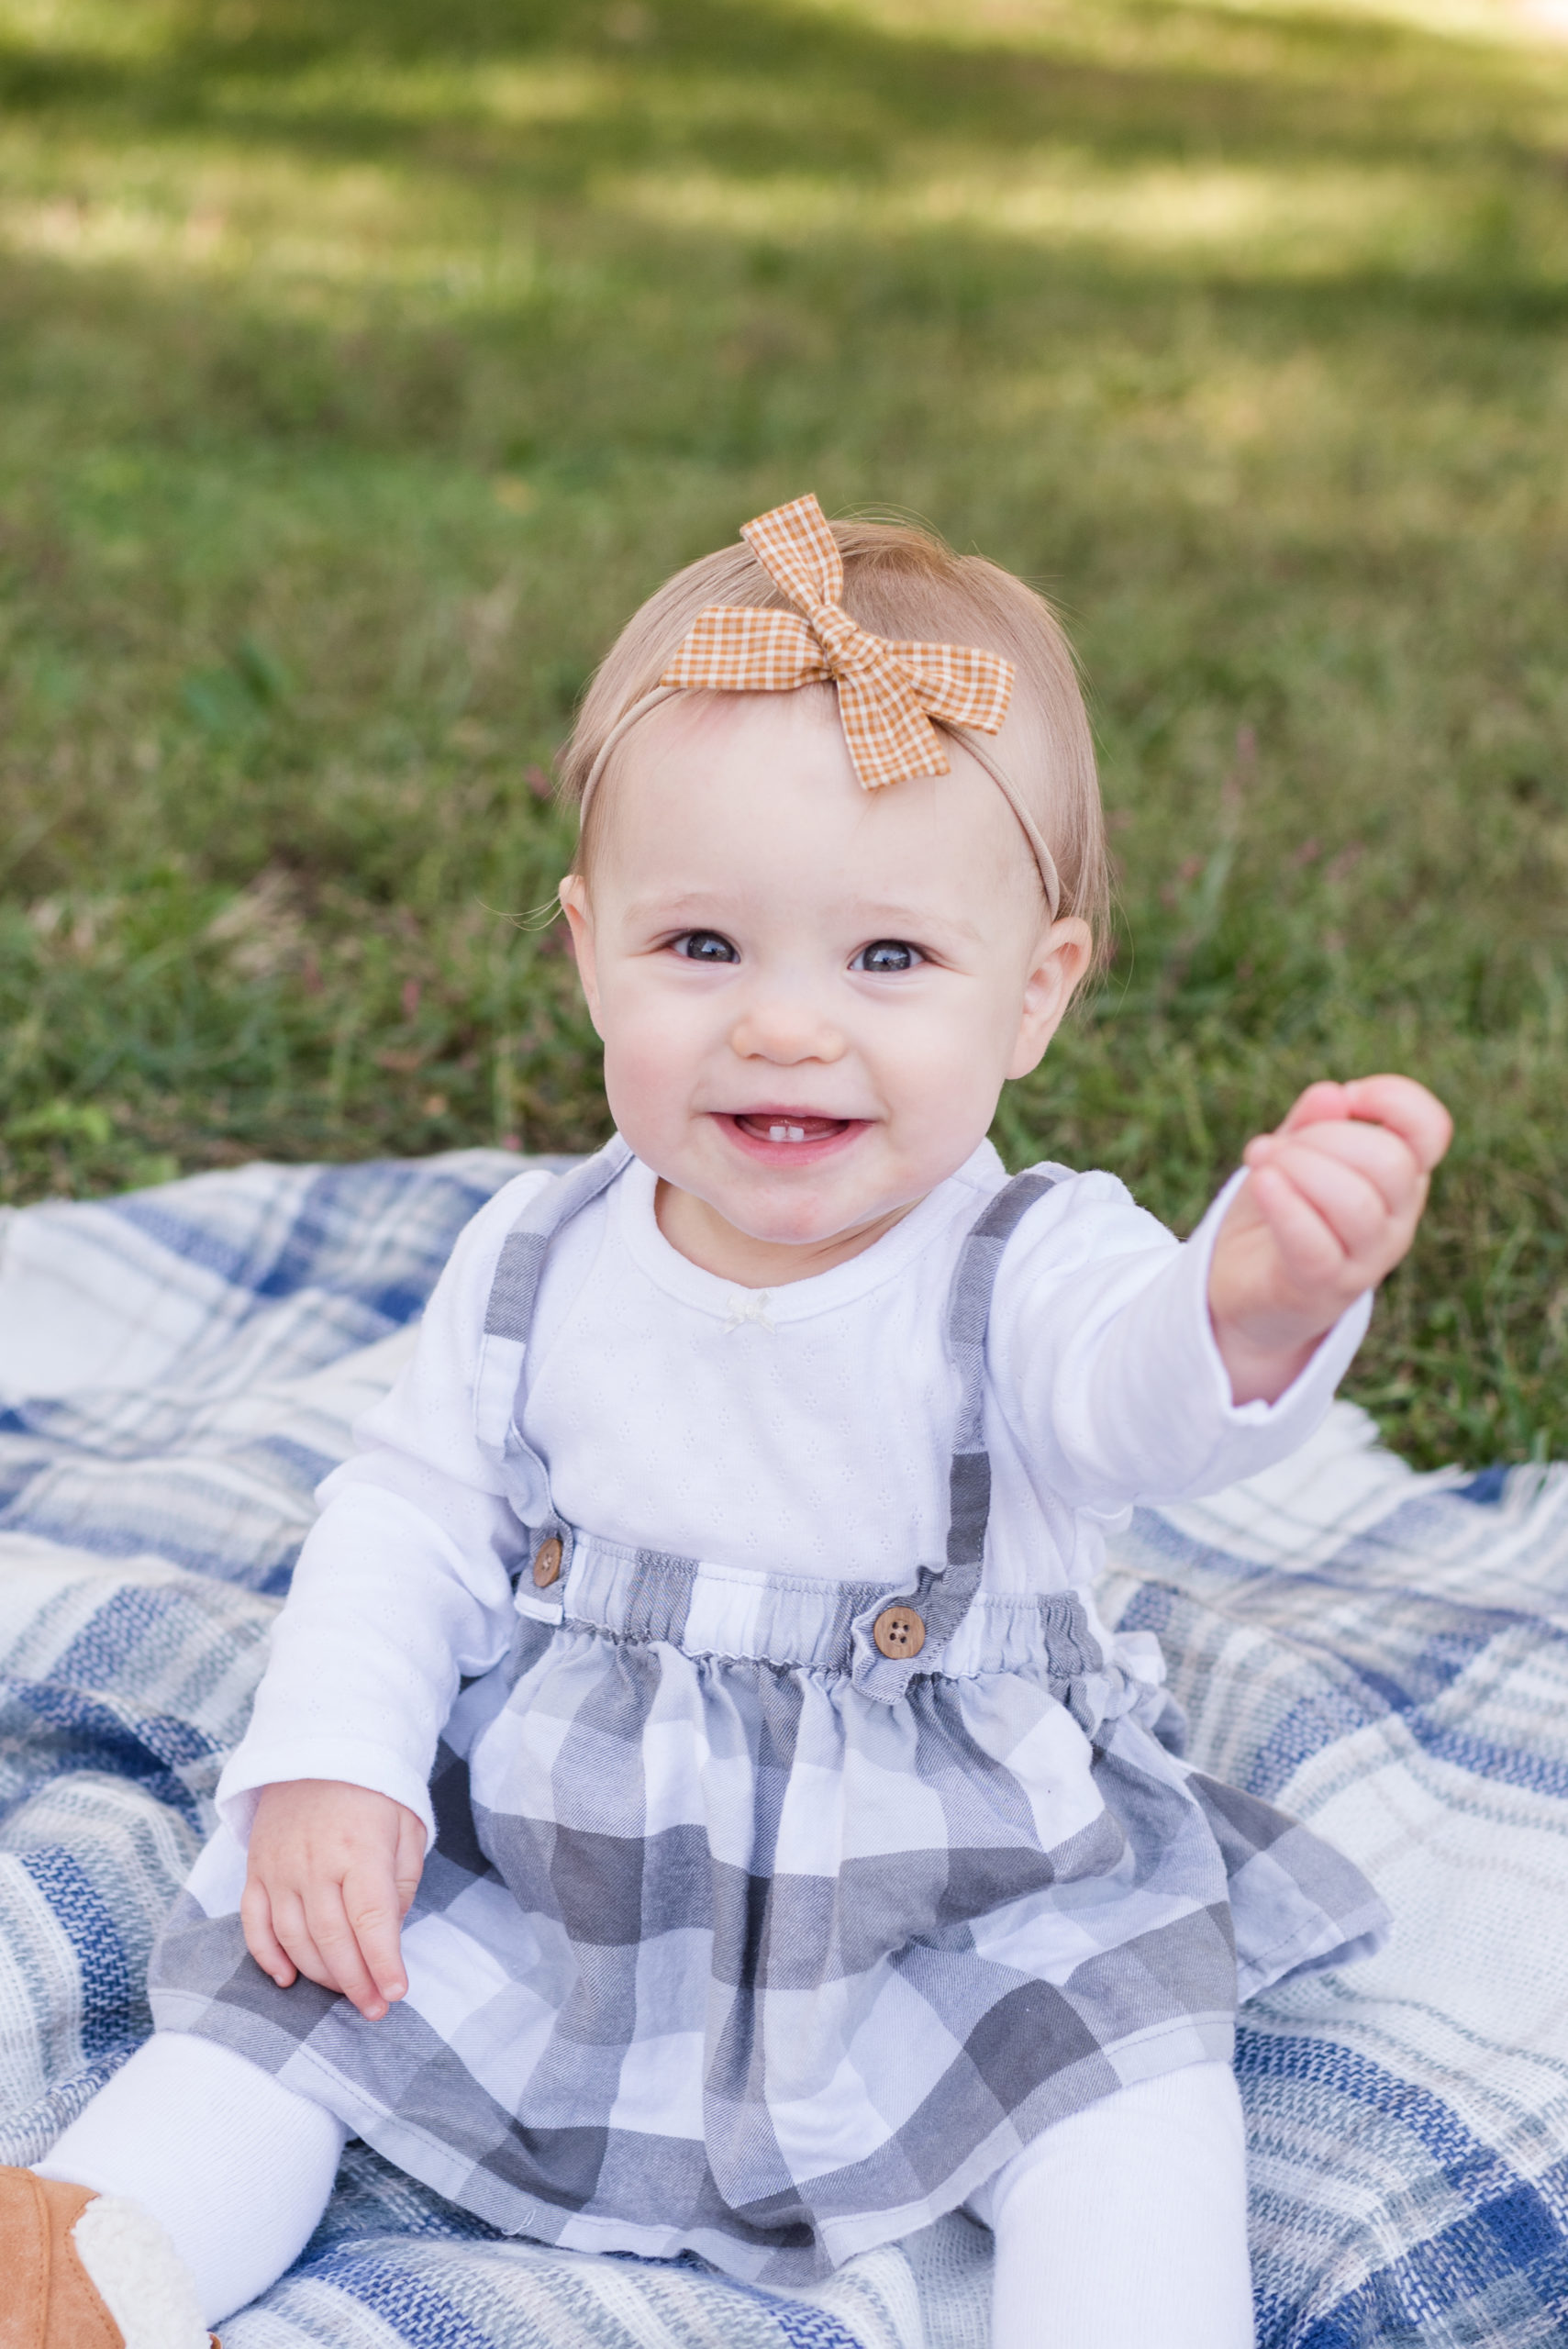 Olivia 10 Months Old - Sweet Williams Photography is a lifestyle, engagement, and wedding photographer serving the Nashville, Tennessee area, and destination locations.